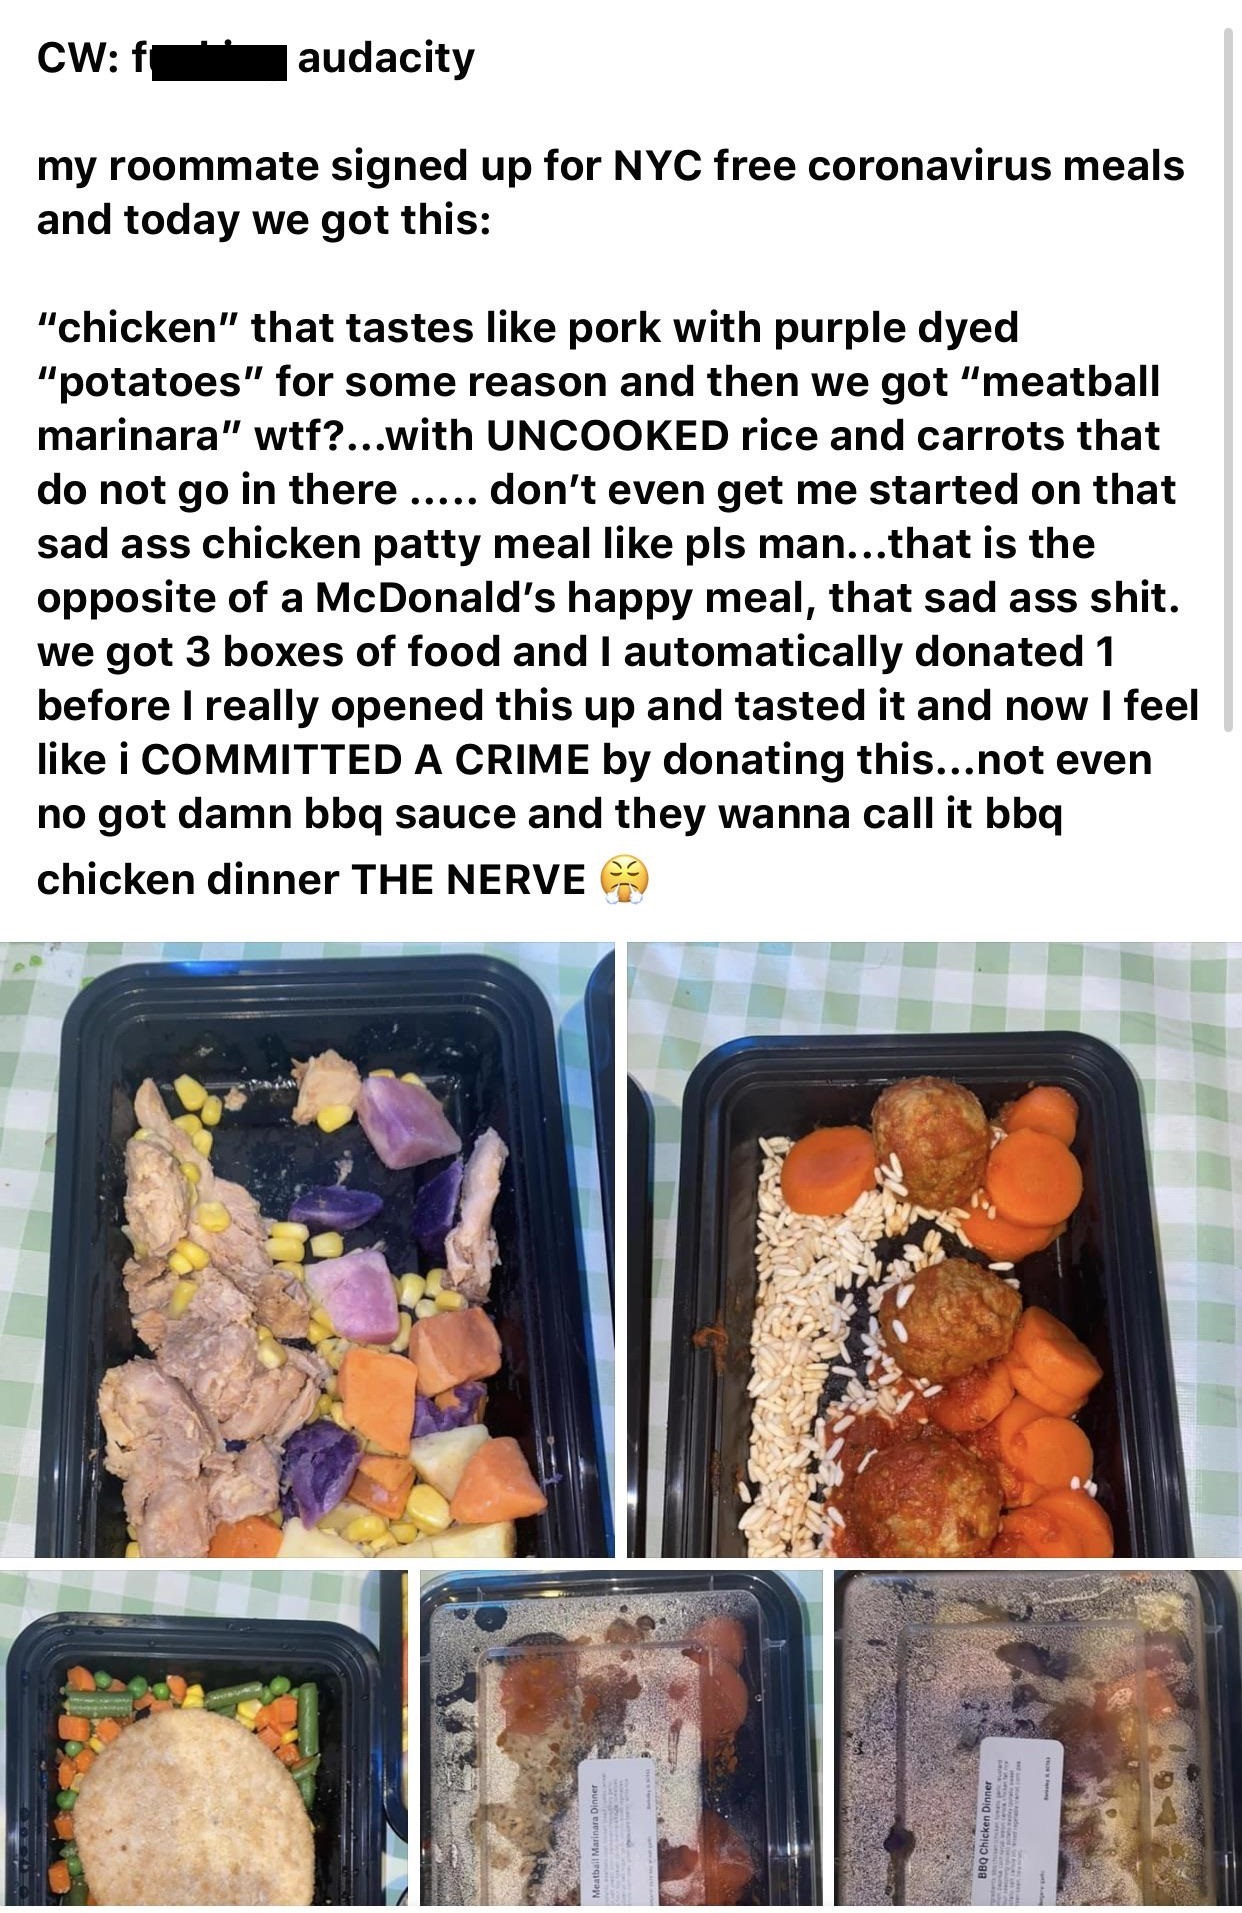 dish - Cw audacity my roommate signed up for Nyc free coronavirus meals and today we got this "chicken" that tastes pork with purple dyed "potatoes" for some reason and then we got "meatball marinara" wtf?...with Uncooked rice and carrots that do not go i